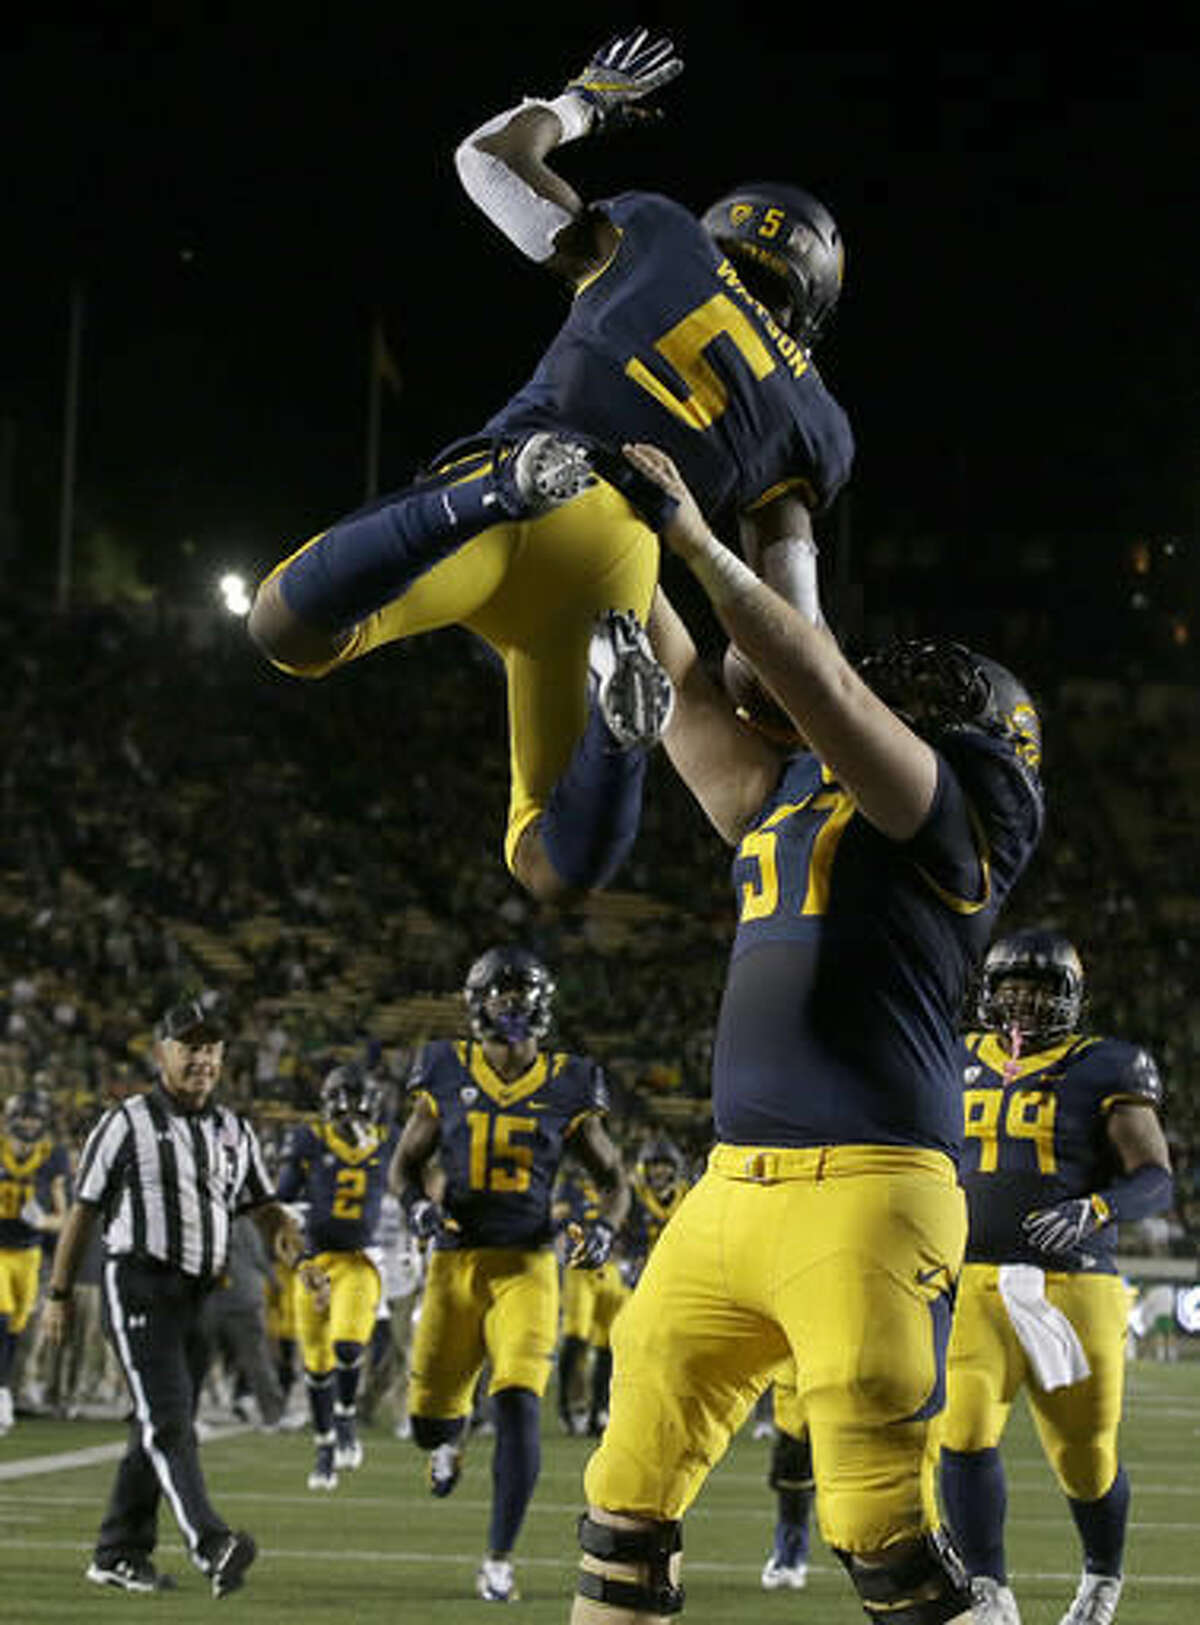 California running back Tre Watson (5) celebrates after catching a touchdown pass, with offensive lineman Addison Ooms (57) during the first half of an NCAA college football game against Oregon in Berkeley, Calif., Friday, Oct. 21, 2016. (AP Photo/Jeff Chiu)